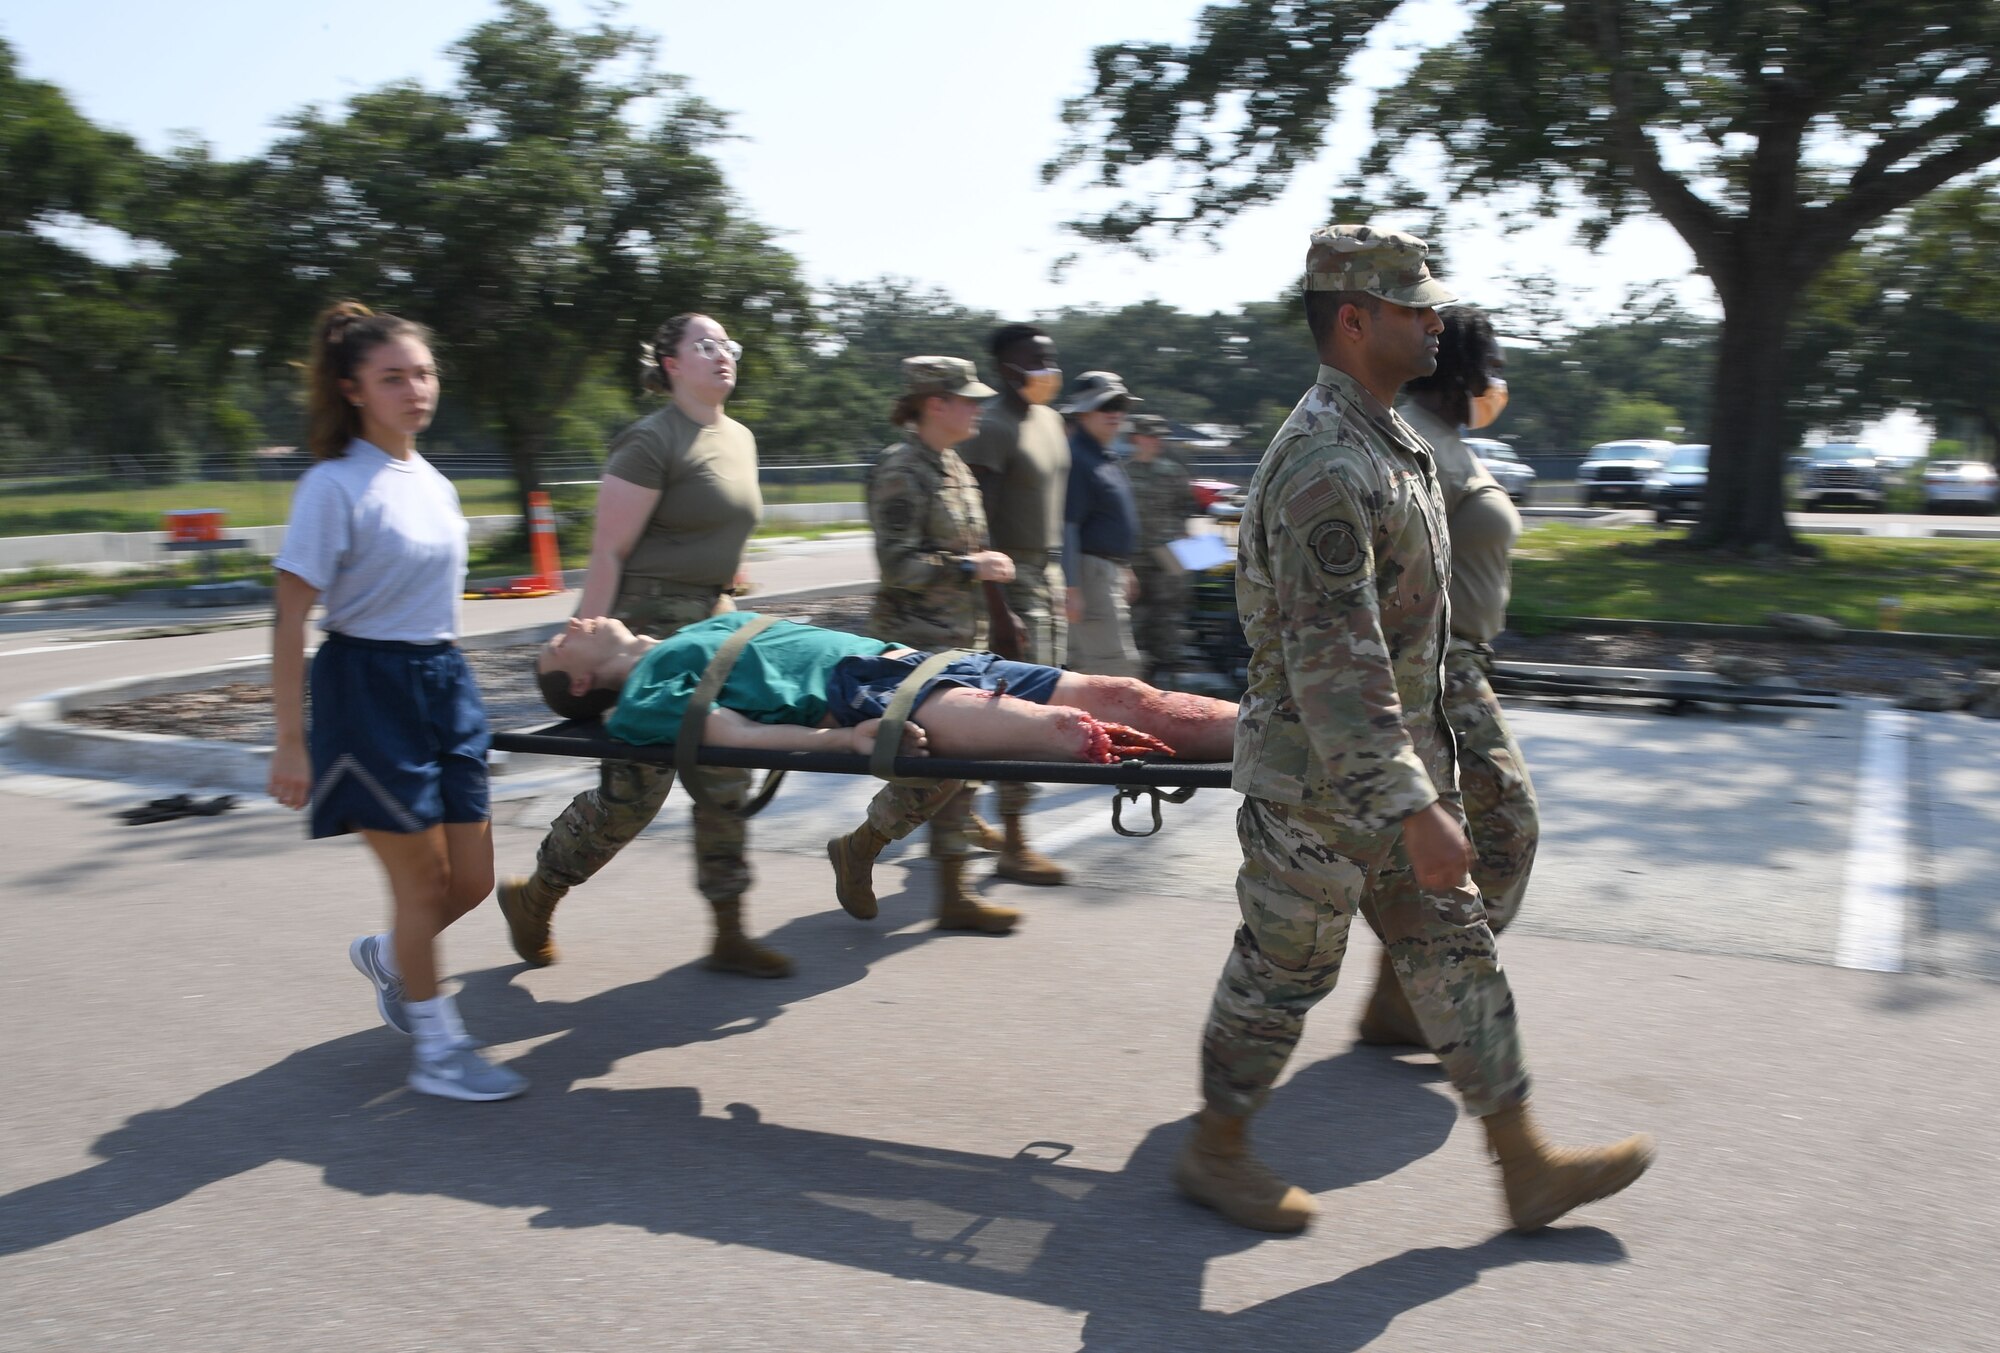 Members from the 81st Medical Group participate in a litter carry during a Tactical Combat Casualty Care Rodeo at Keesler Air Force Base, Mississippi, August 5, 2021. The rodeo, a Ready Eagle Training component, provides practical hands-on critical medical trauma skills training for 81st MDG personnel. (U.S. Air Force photo by Kemberly Groue)